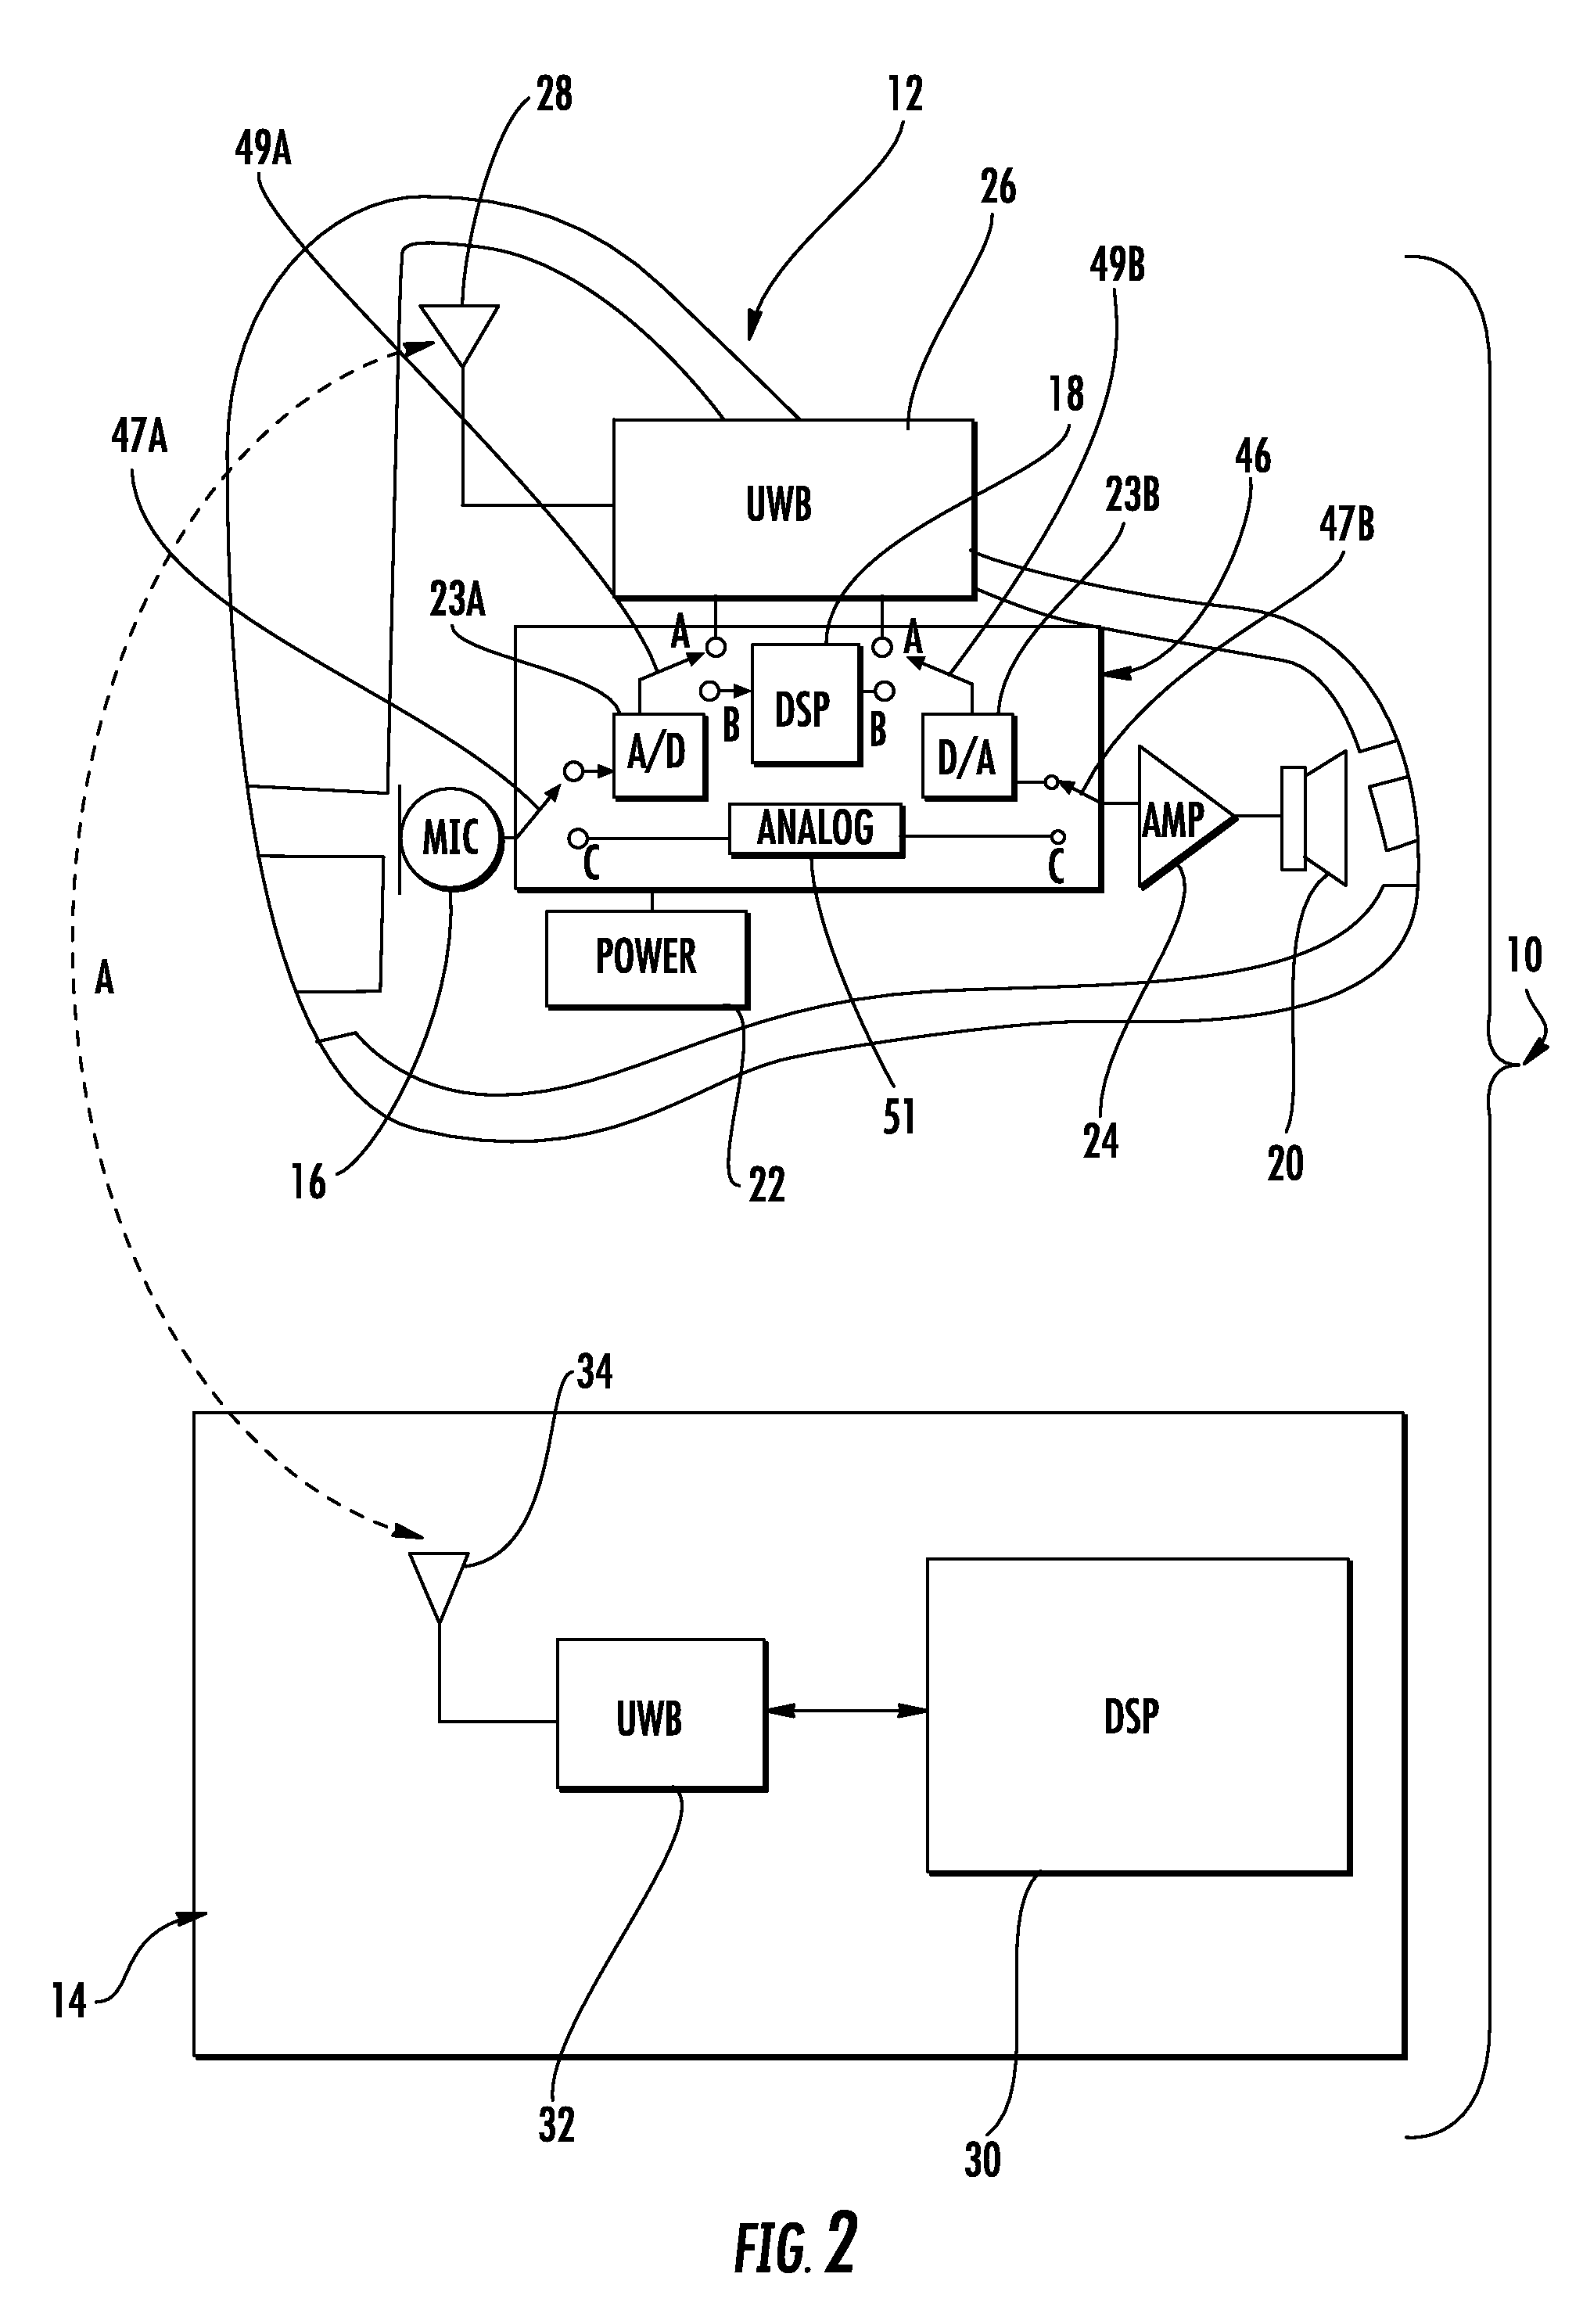 Method of enhancing sound for hearing impaired individuals